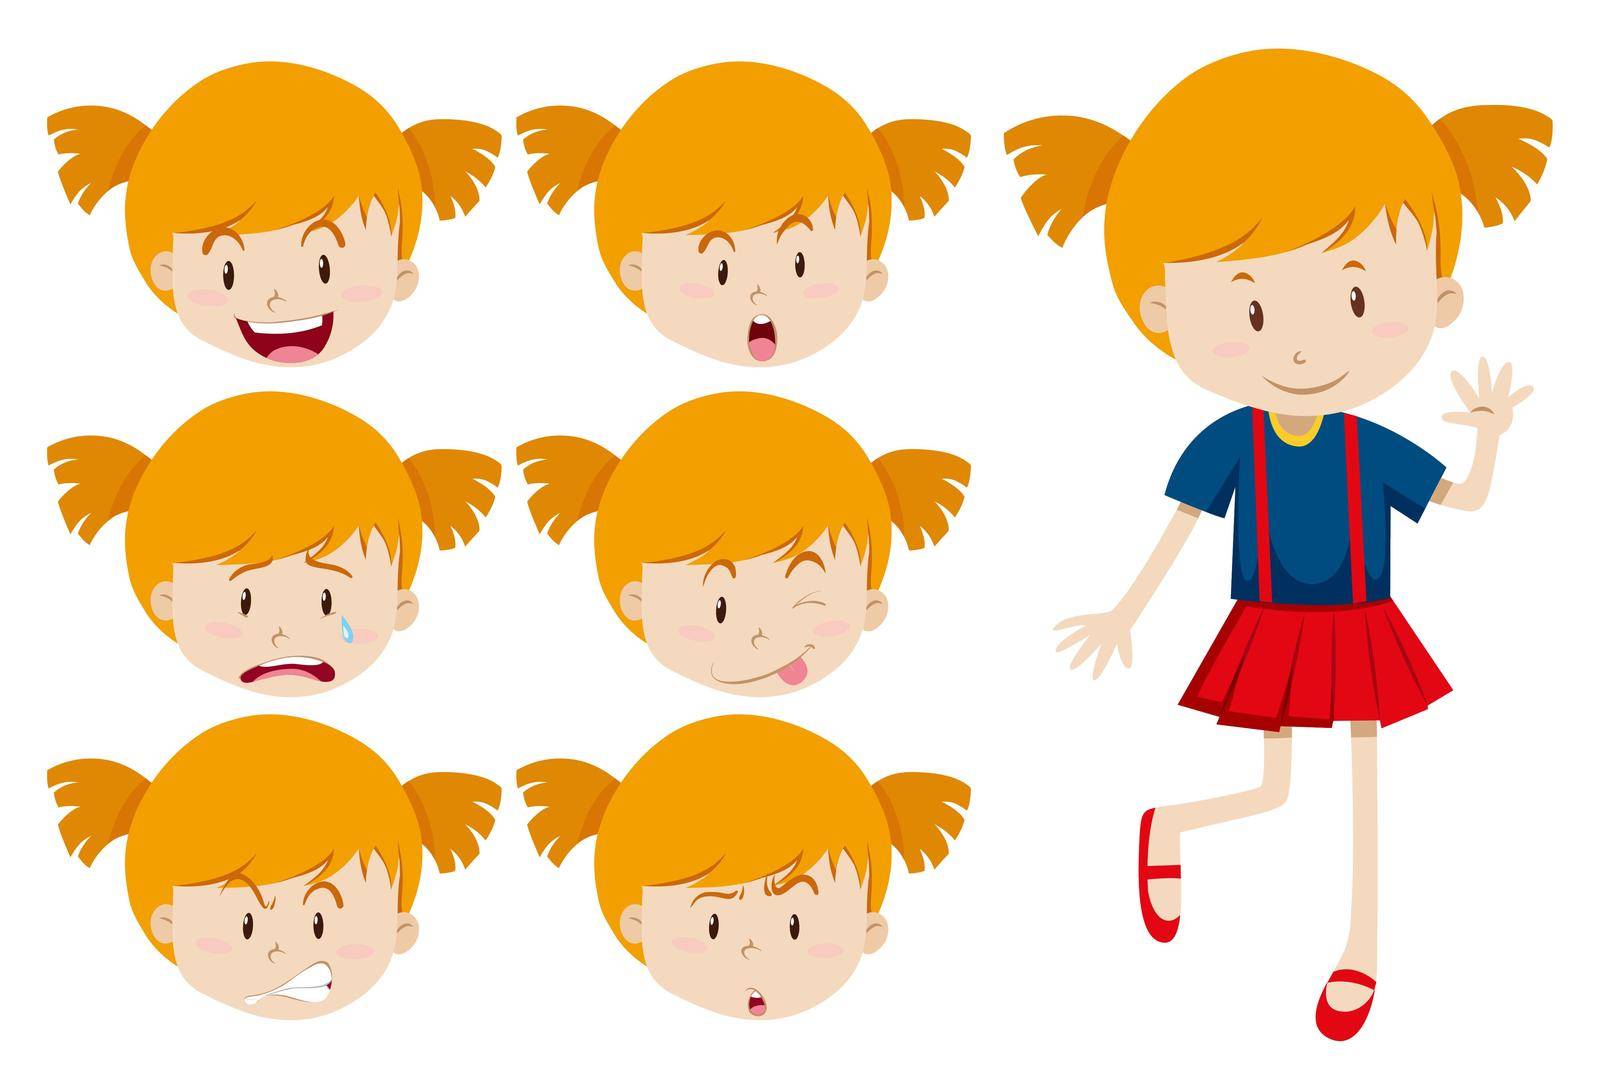 Cute girl with facial expressions illustration